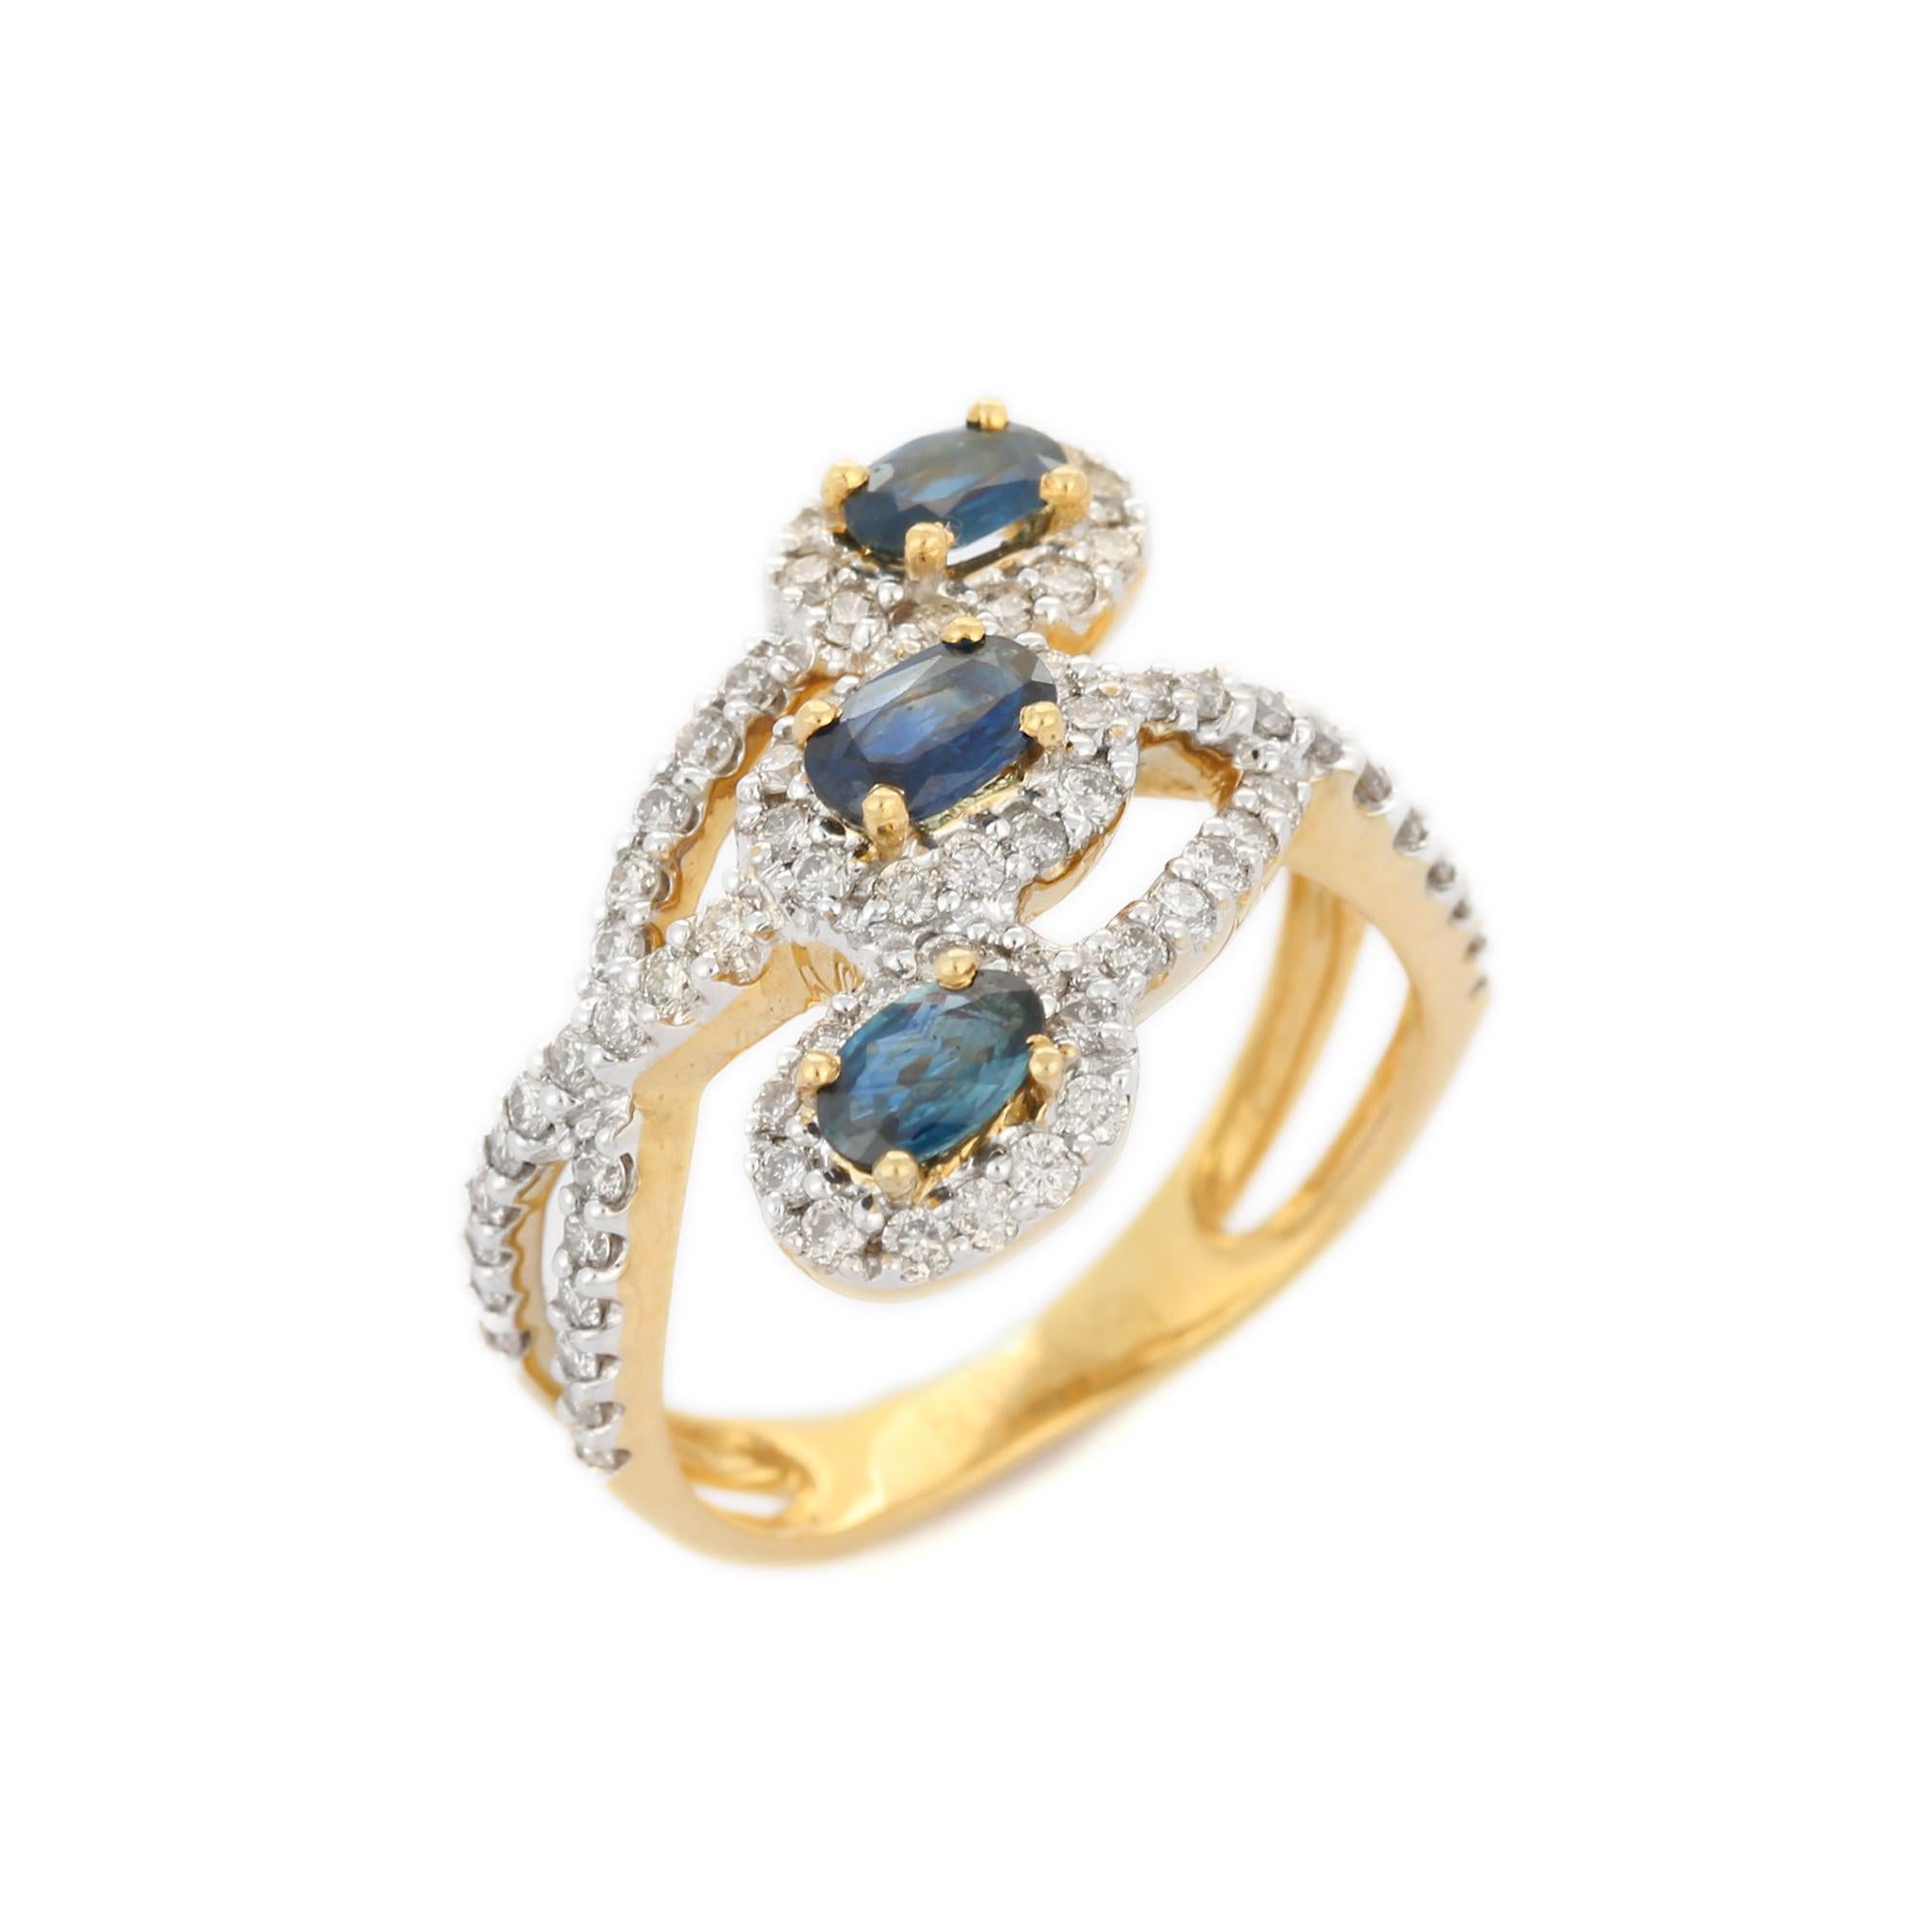 For Sale:  Three Oval Blue Sapphire Diamond Engagement Ring in 18k Solid Yellow Gold 5